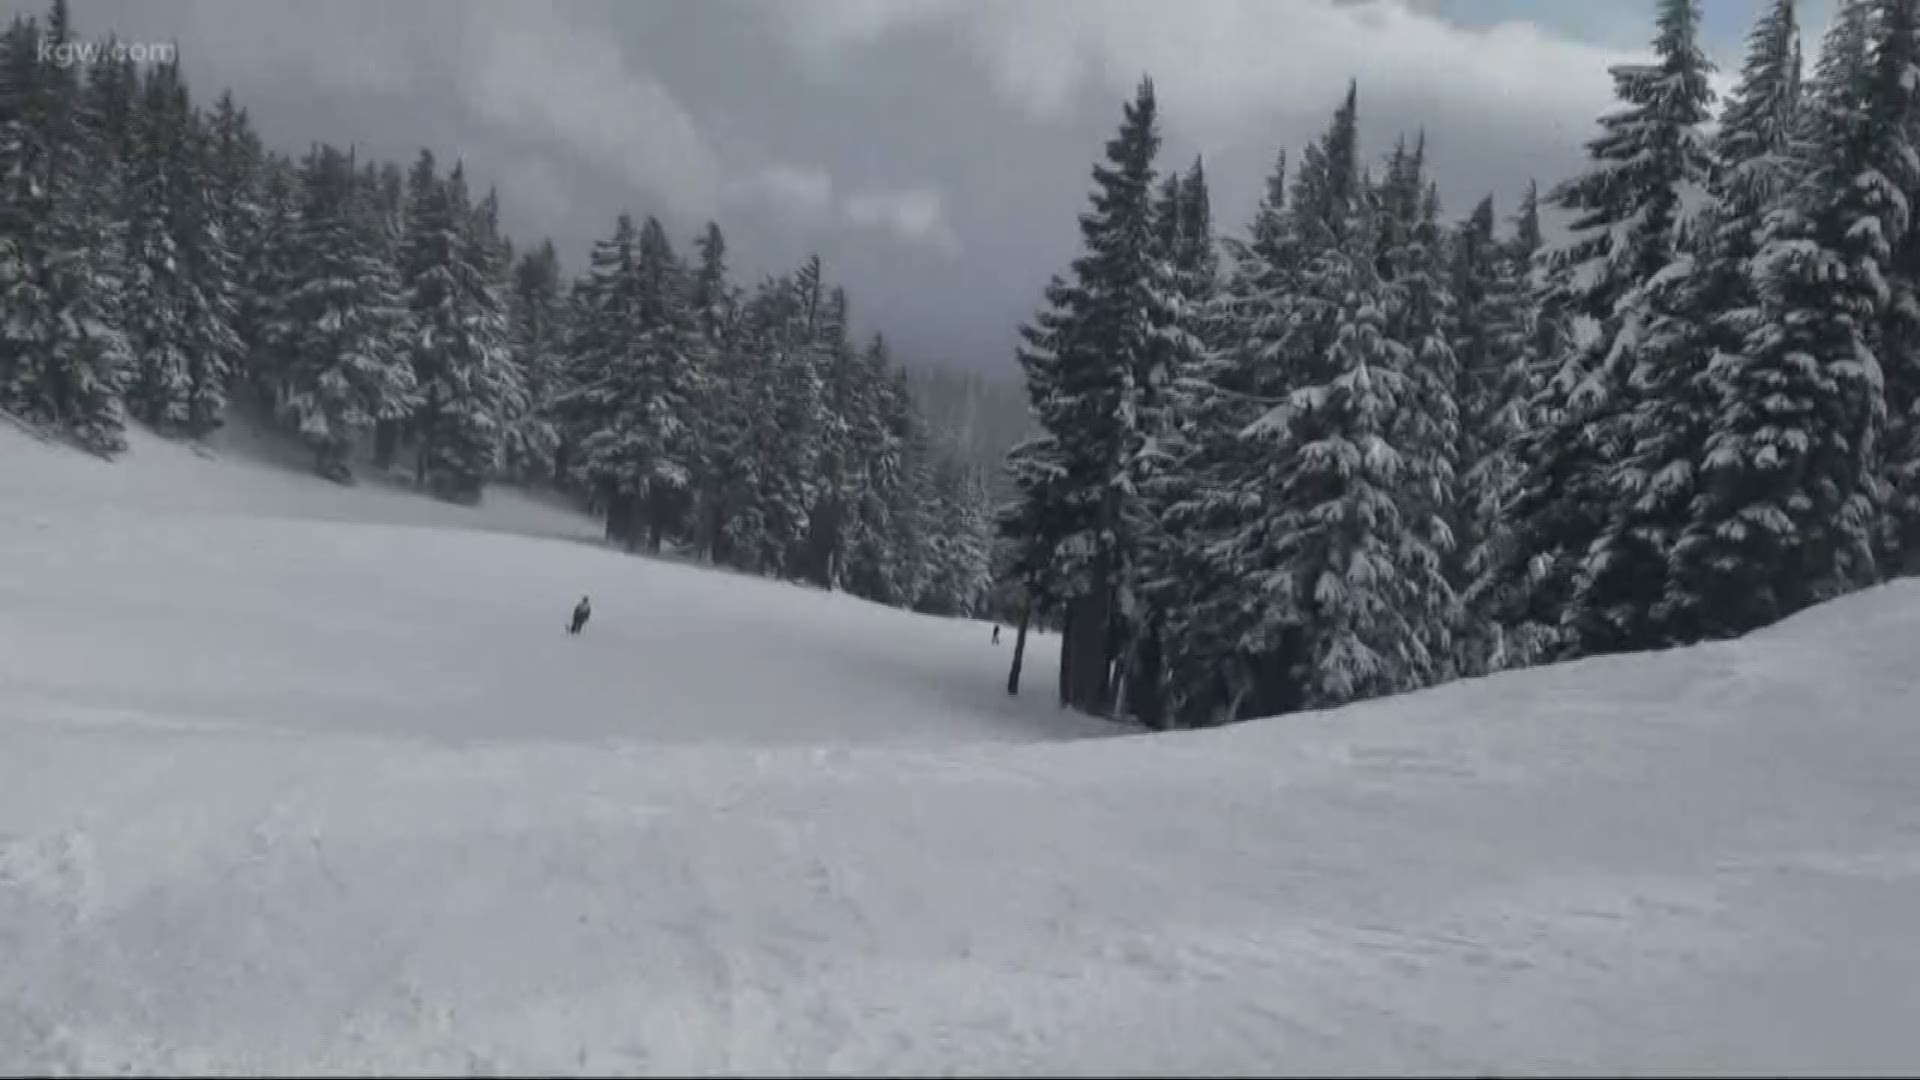 Ski resorts are open and more snow is expected.